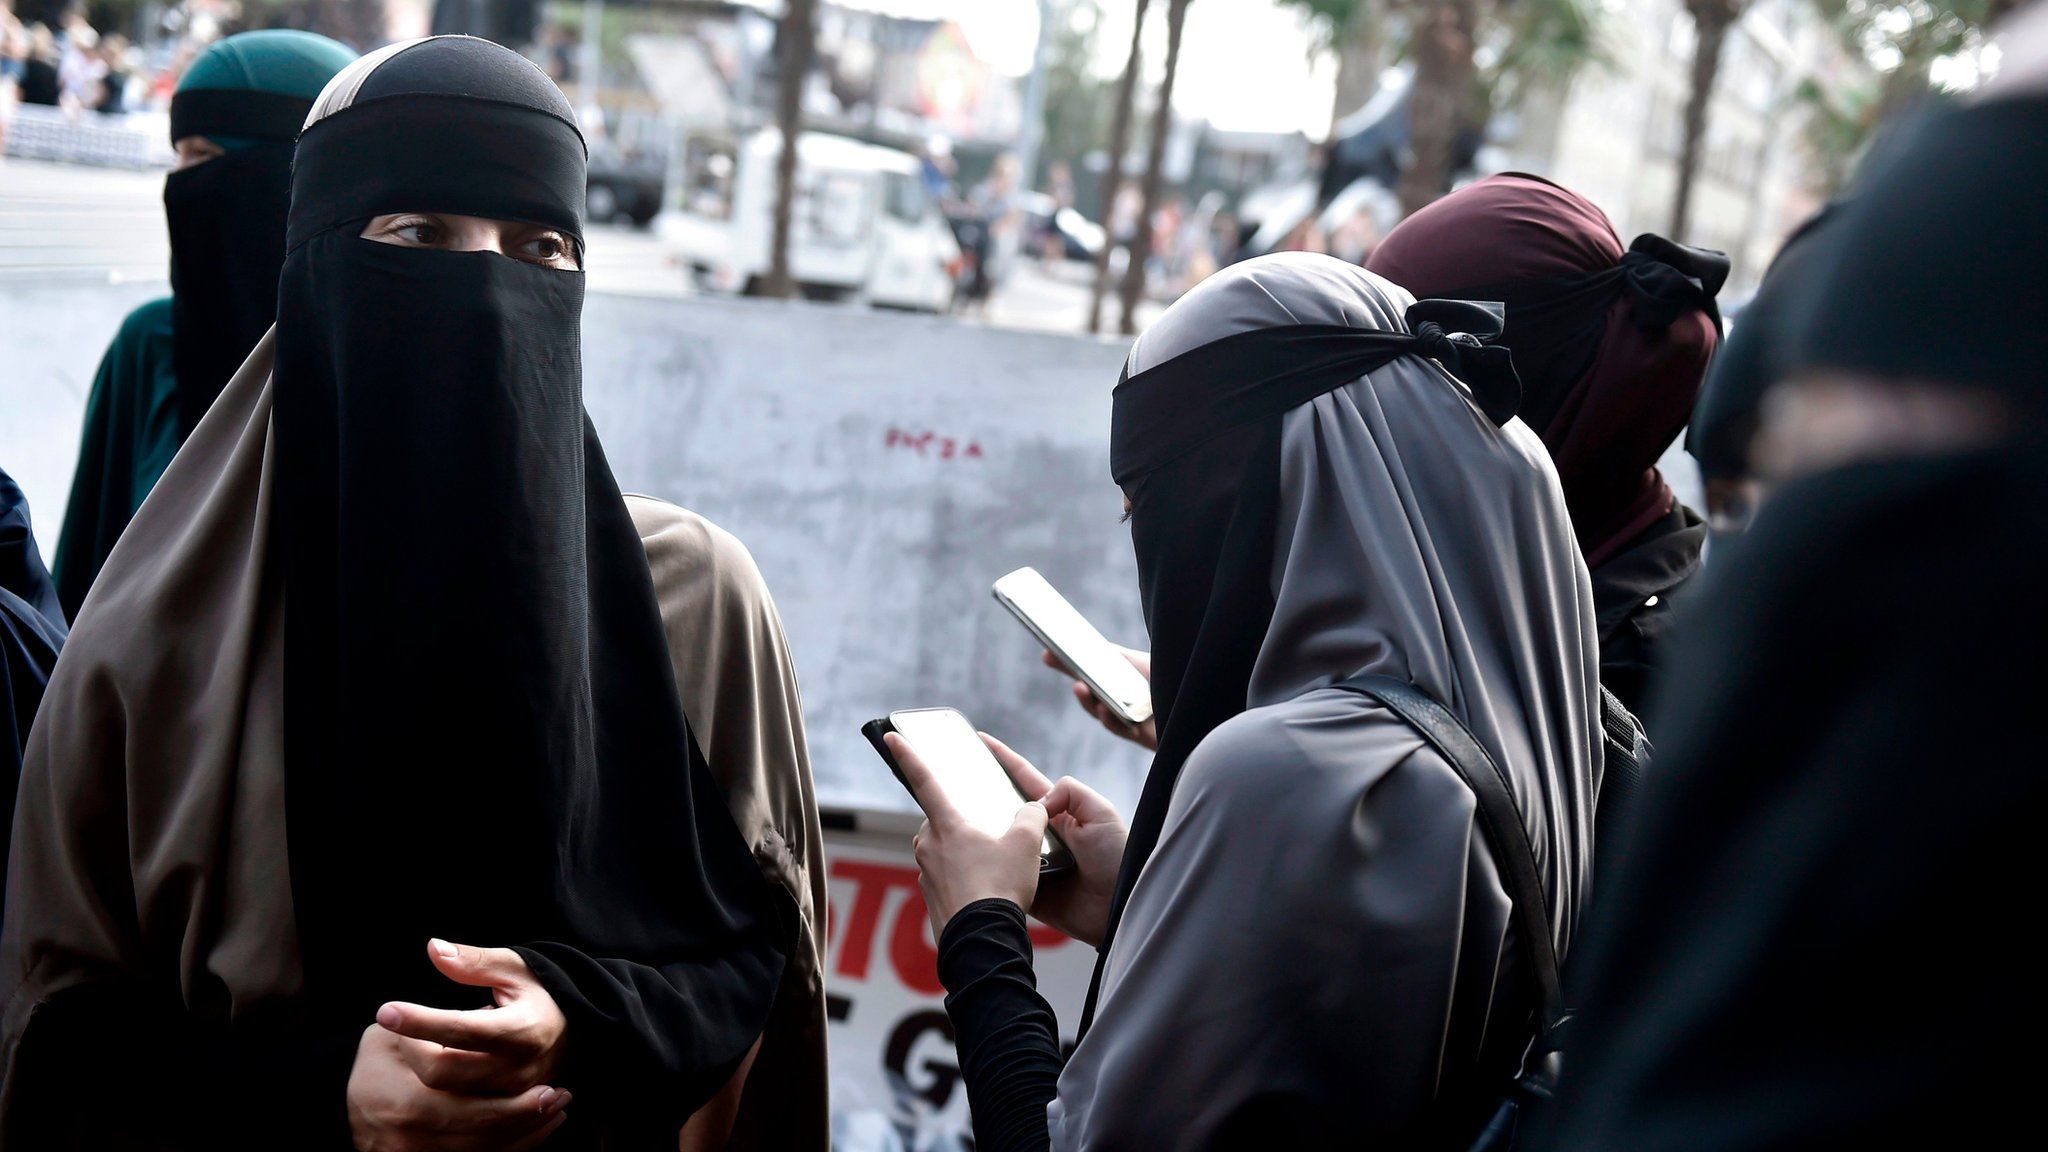 Women wearing niqab to veil their faces take part in a demonstration on August 1, 2018